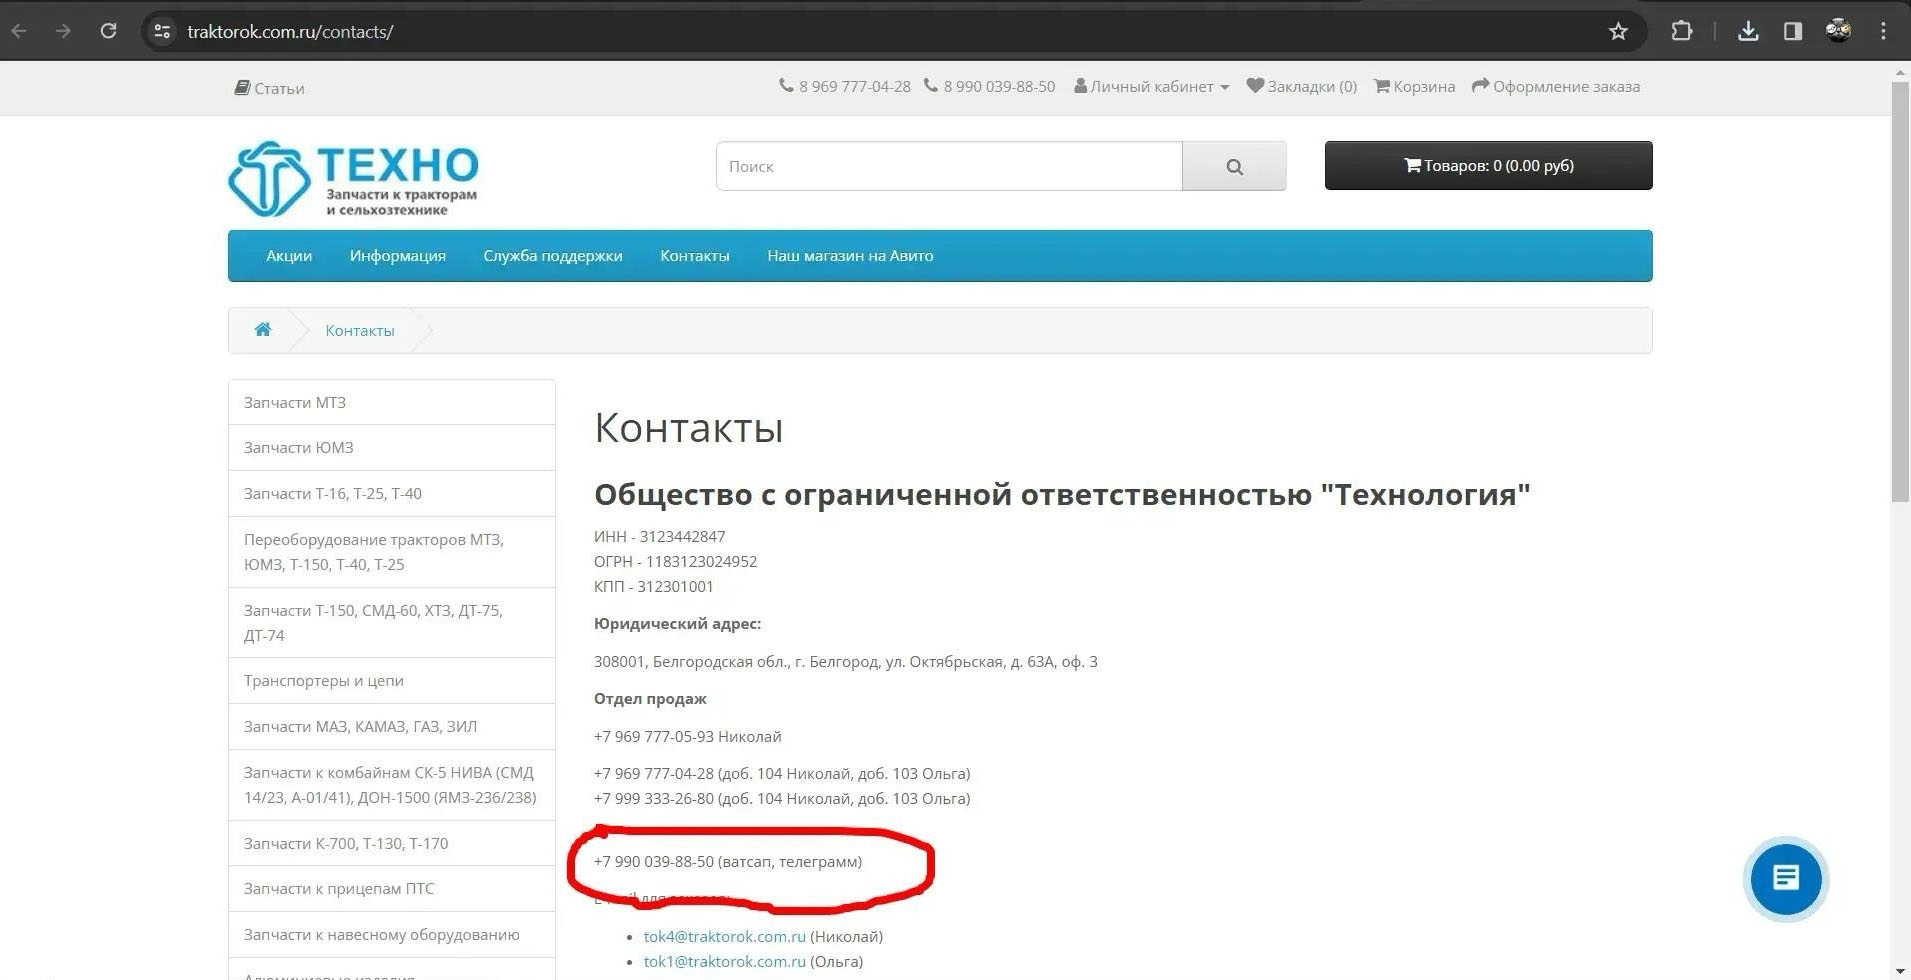 Screenshots of the “contacts” section of companies controlled by Alexander Pavlovsky in Ukraine and the Russian Federation